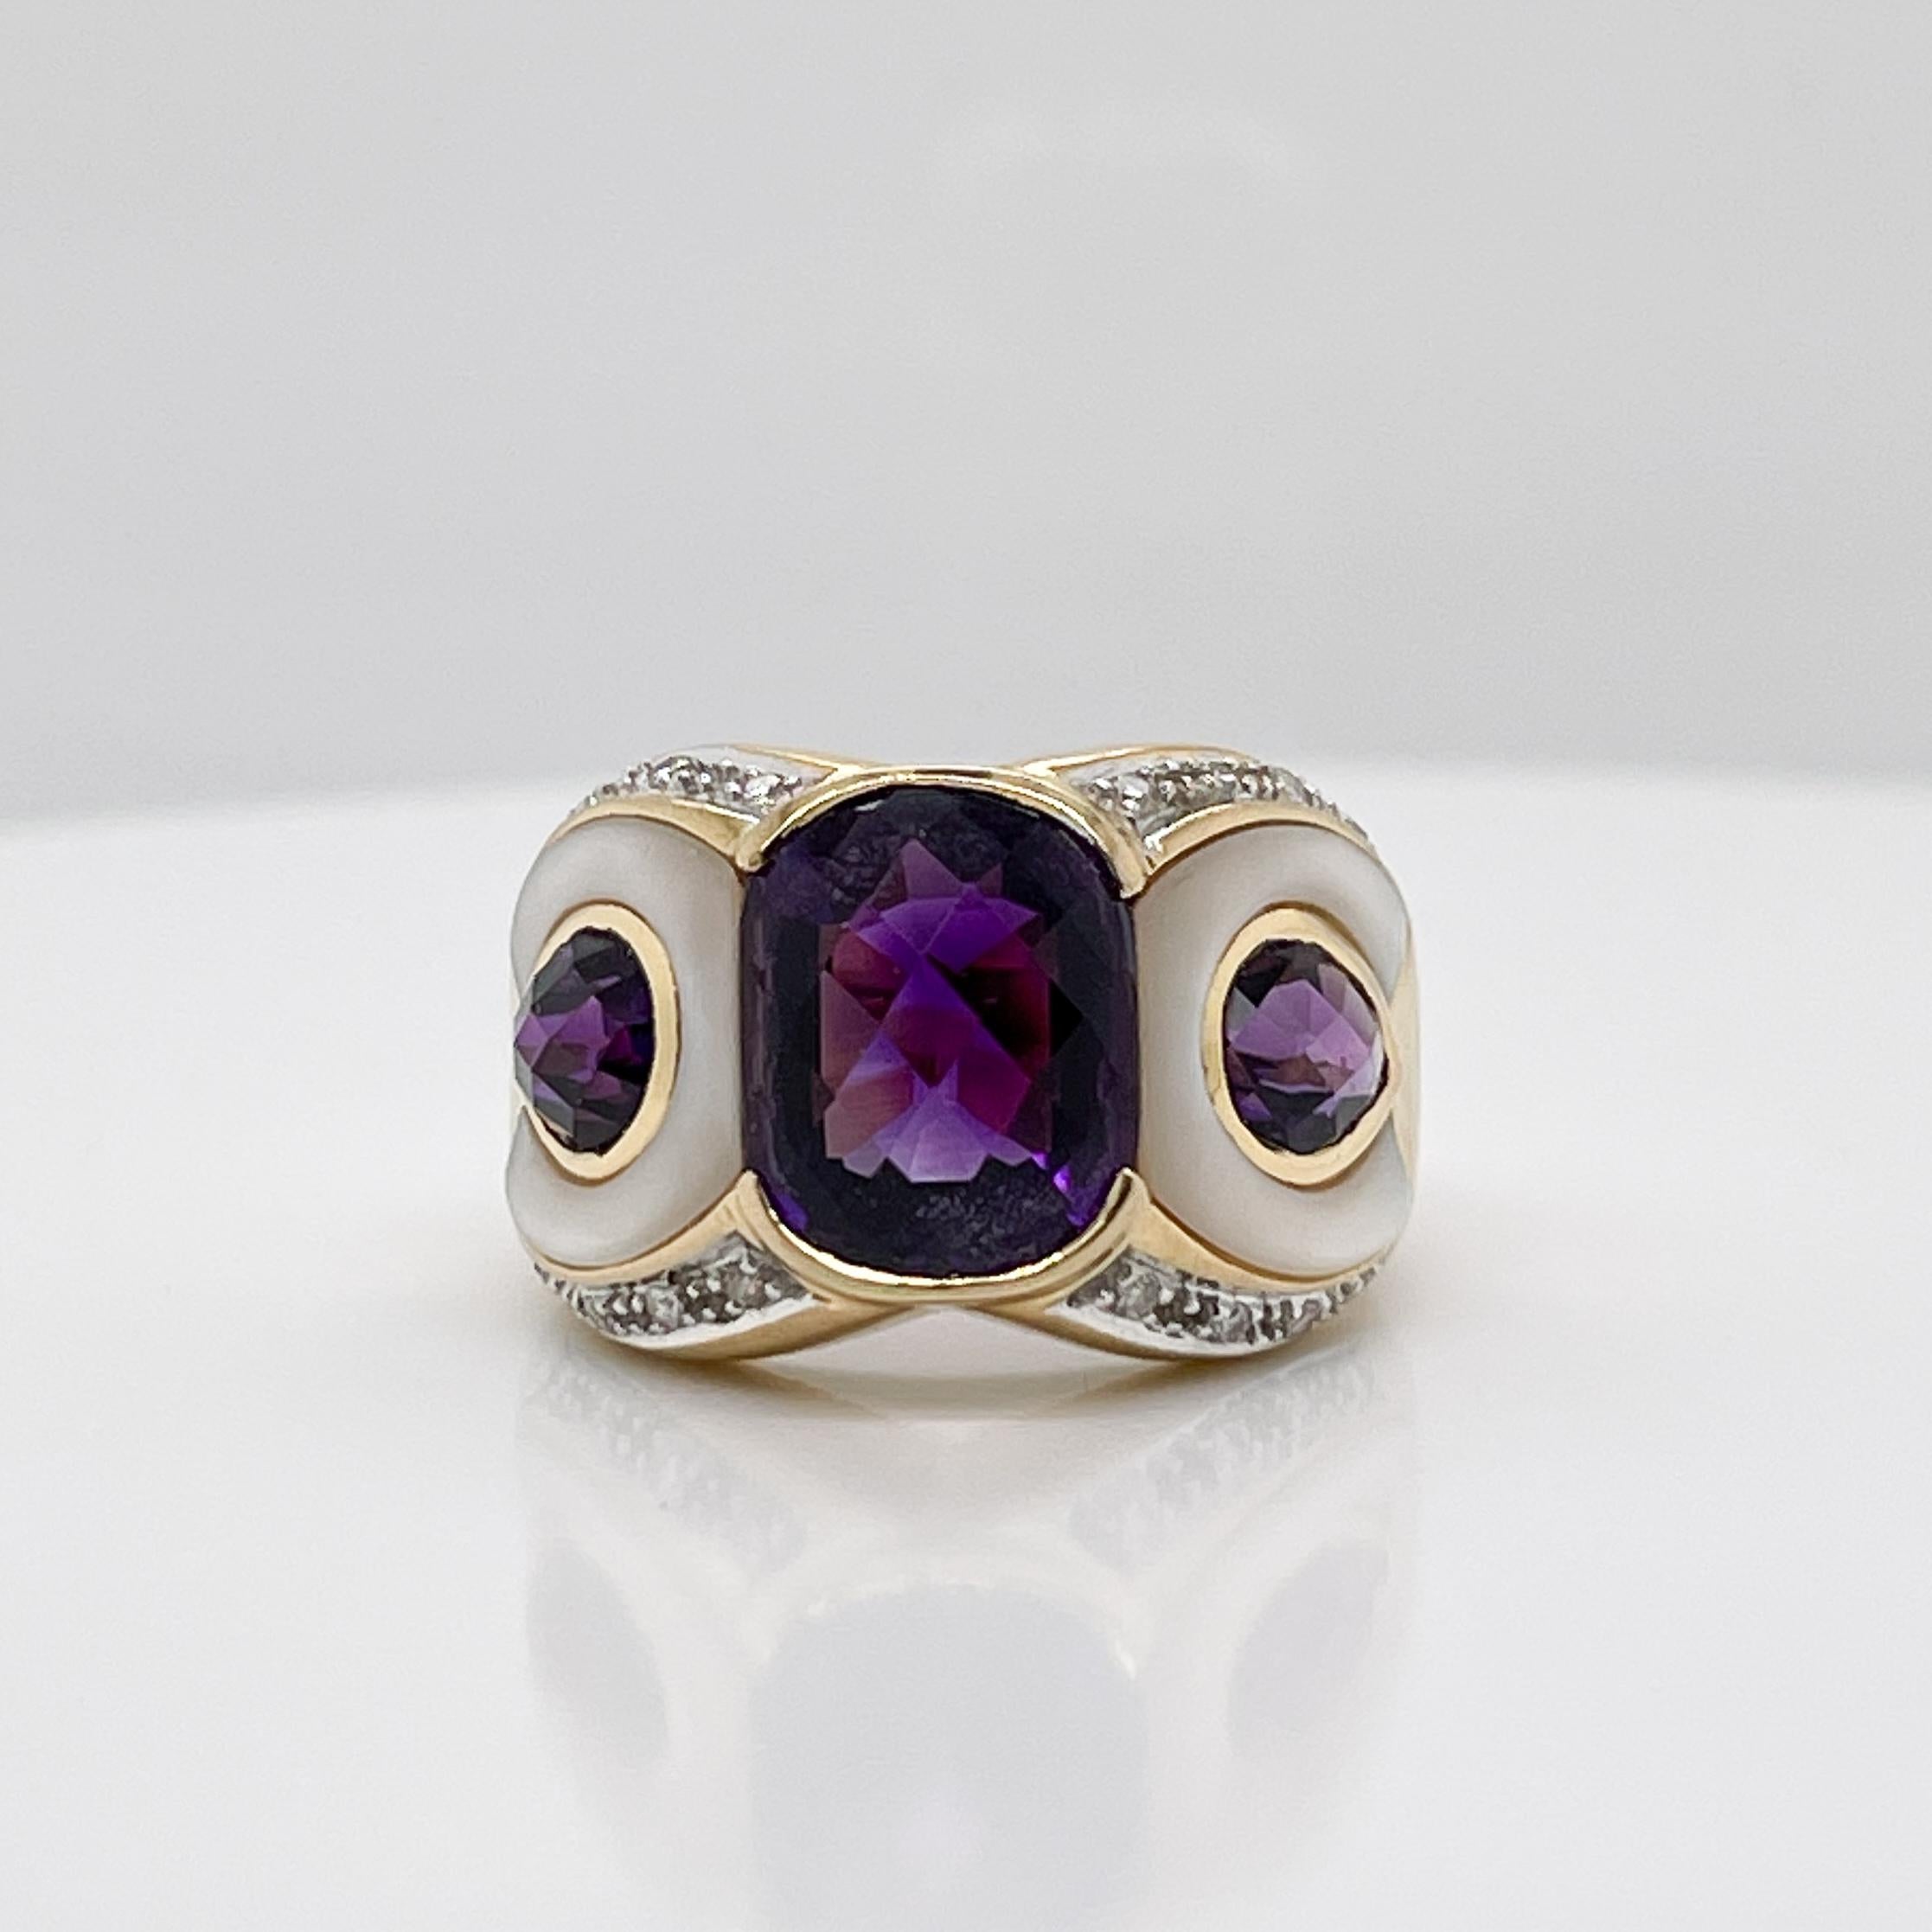 Owl/Parrot Bird Cocktail Ring in 18k Gold, Mother of Pearl, Diamond & Amethyst In Good Condition For Sale In Philadelphia, PA